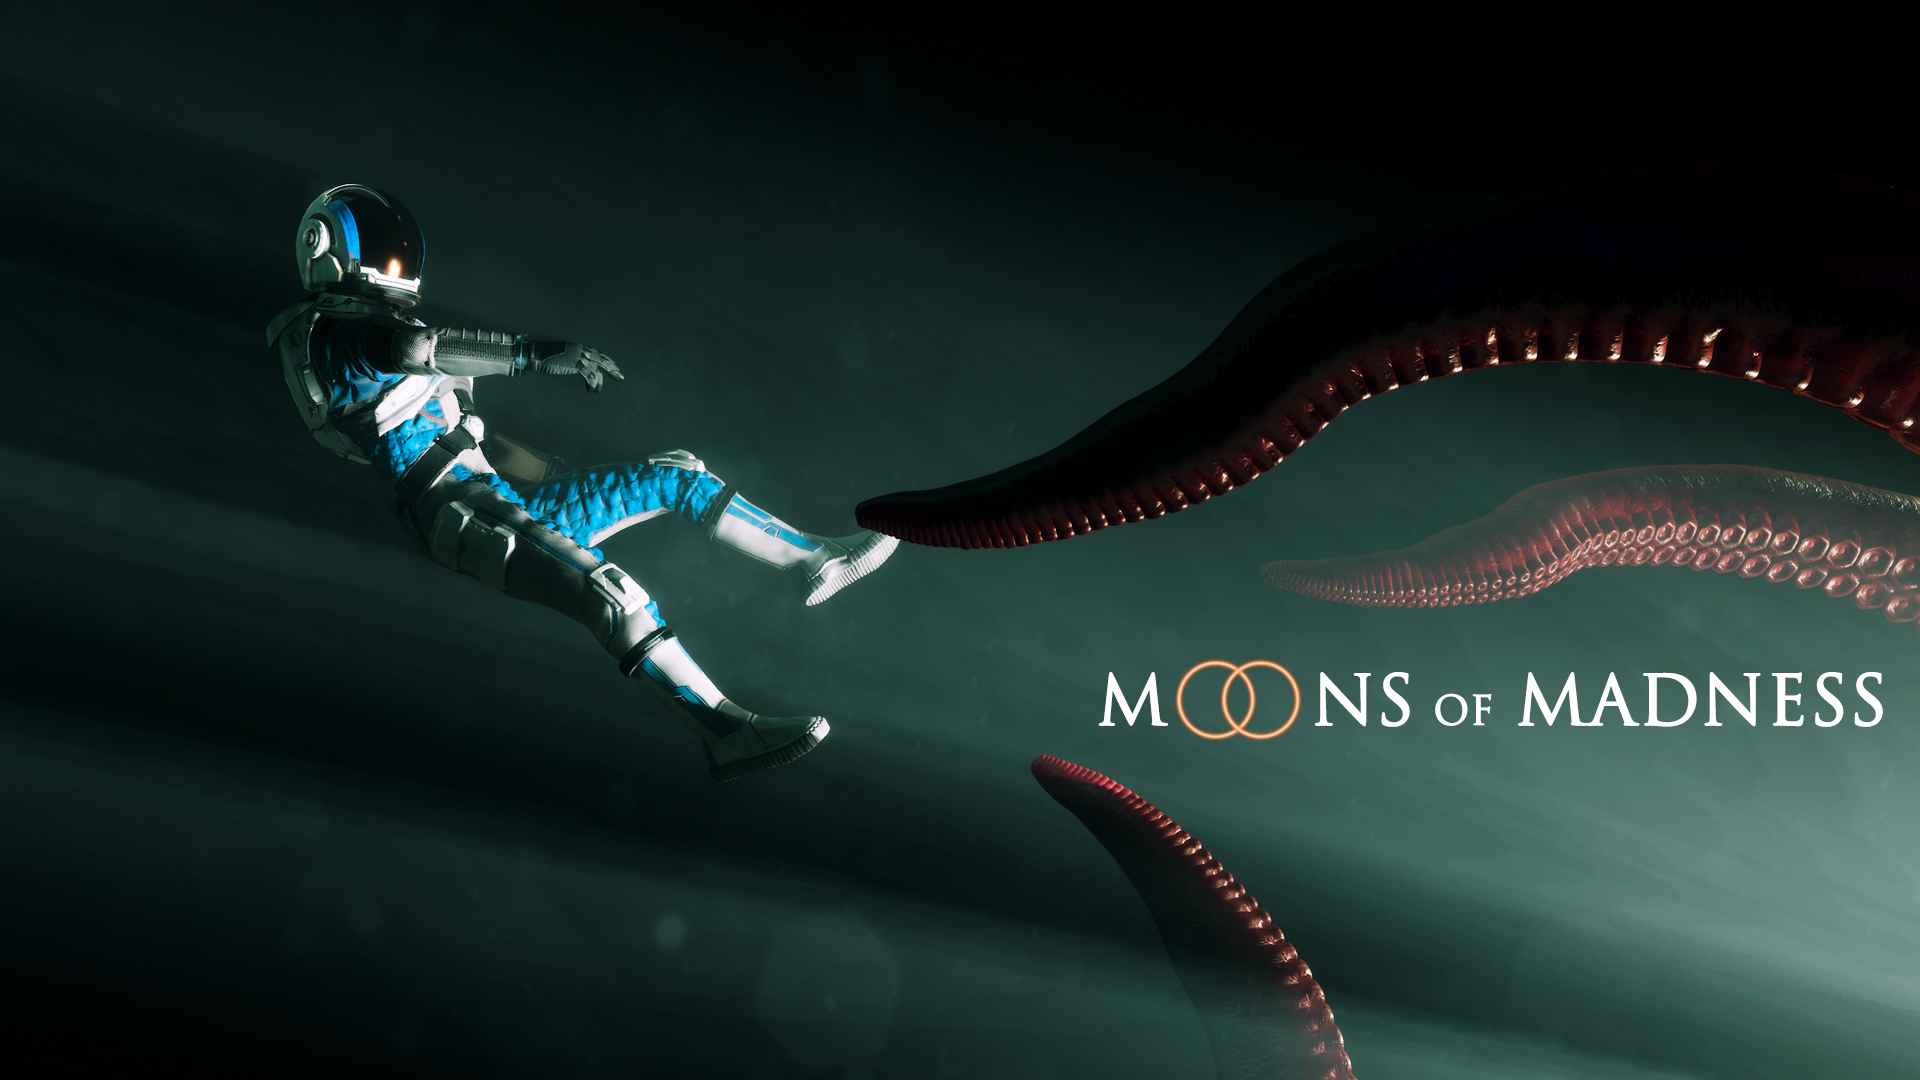 Moons of Madness tentacoli all'orizzonte!